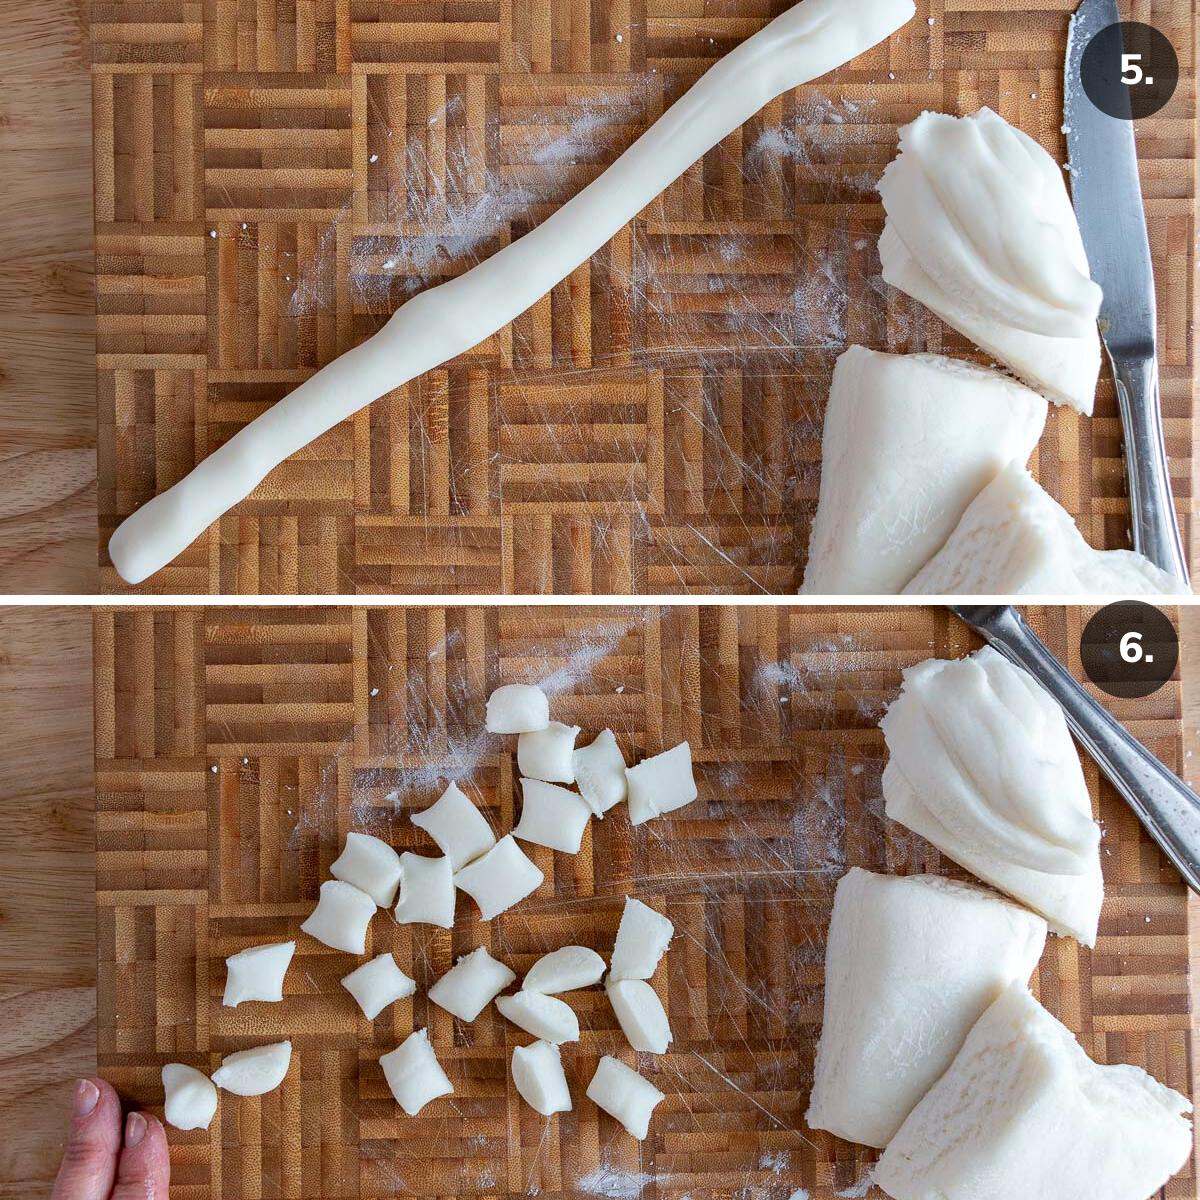 Rolling the tang yuan dough into a rope and then cutting it into sections.